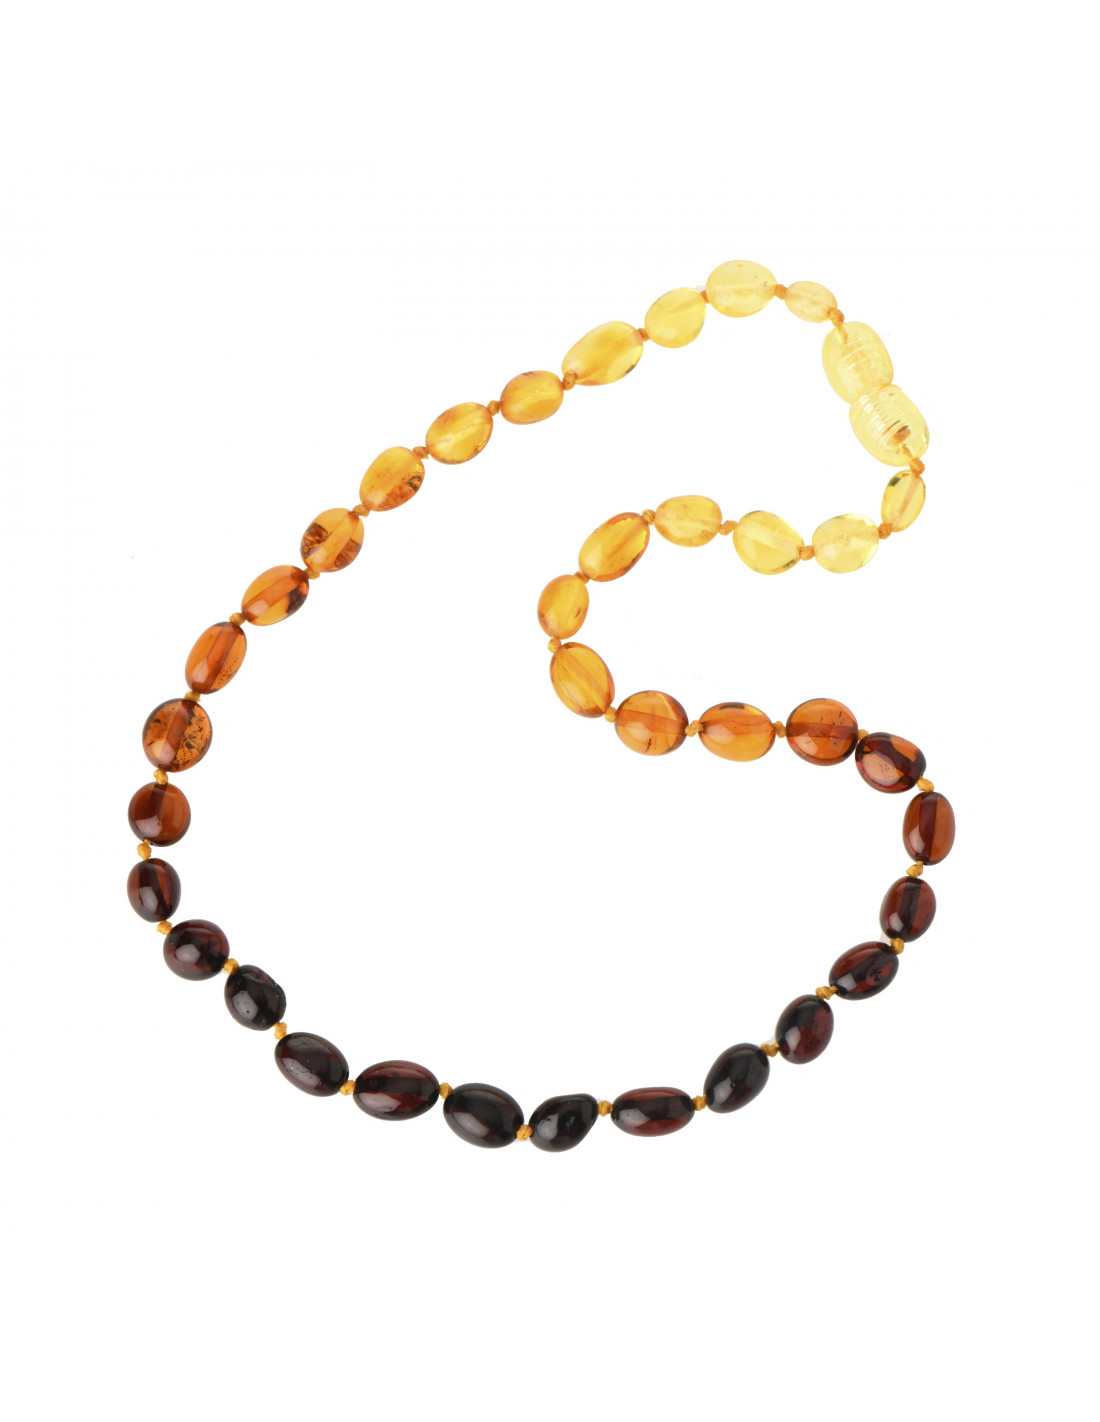 Momma Goose Baltic Amber Necklace Baby - The Breastfeeding Center, LLC